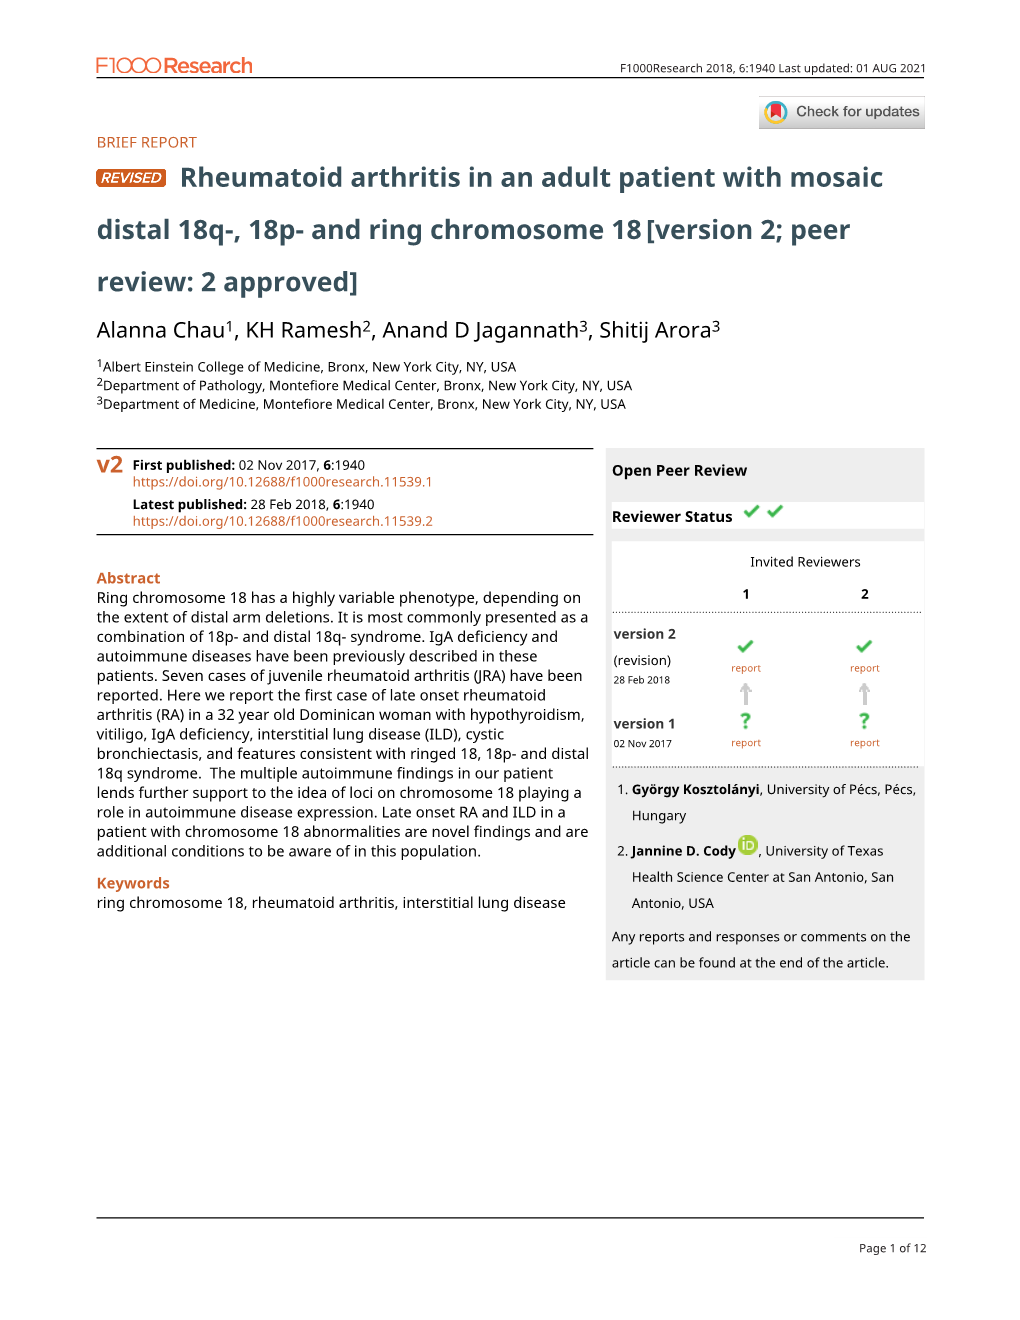 Rheumatoid Arthritis in an Adult Patient with Mosaic Distal 18Q-, 18P- and Ring Chromosome 18 [Version 2; Peer Review: 2 Approved]